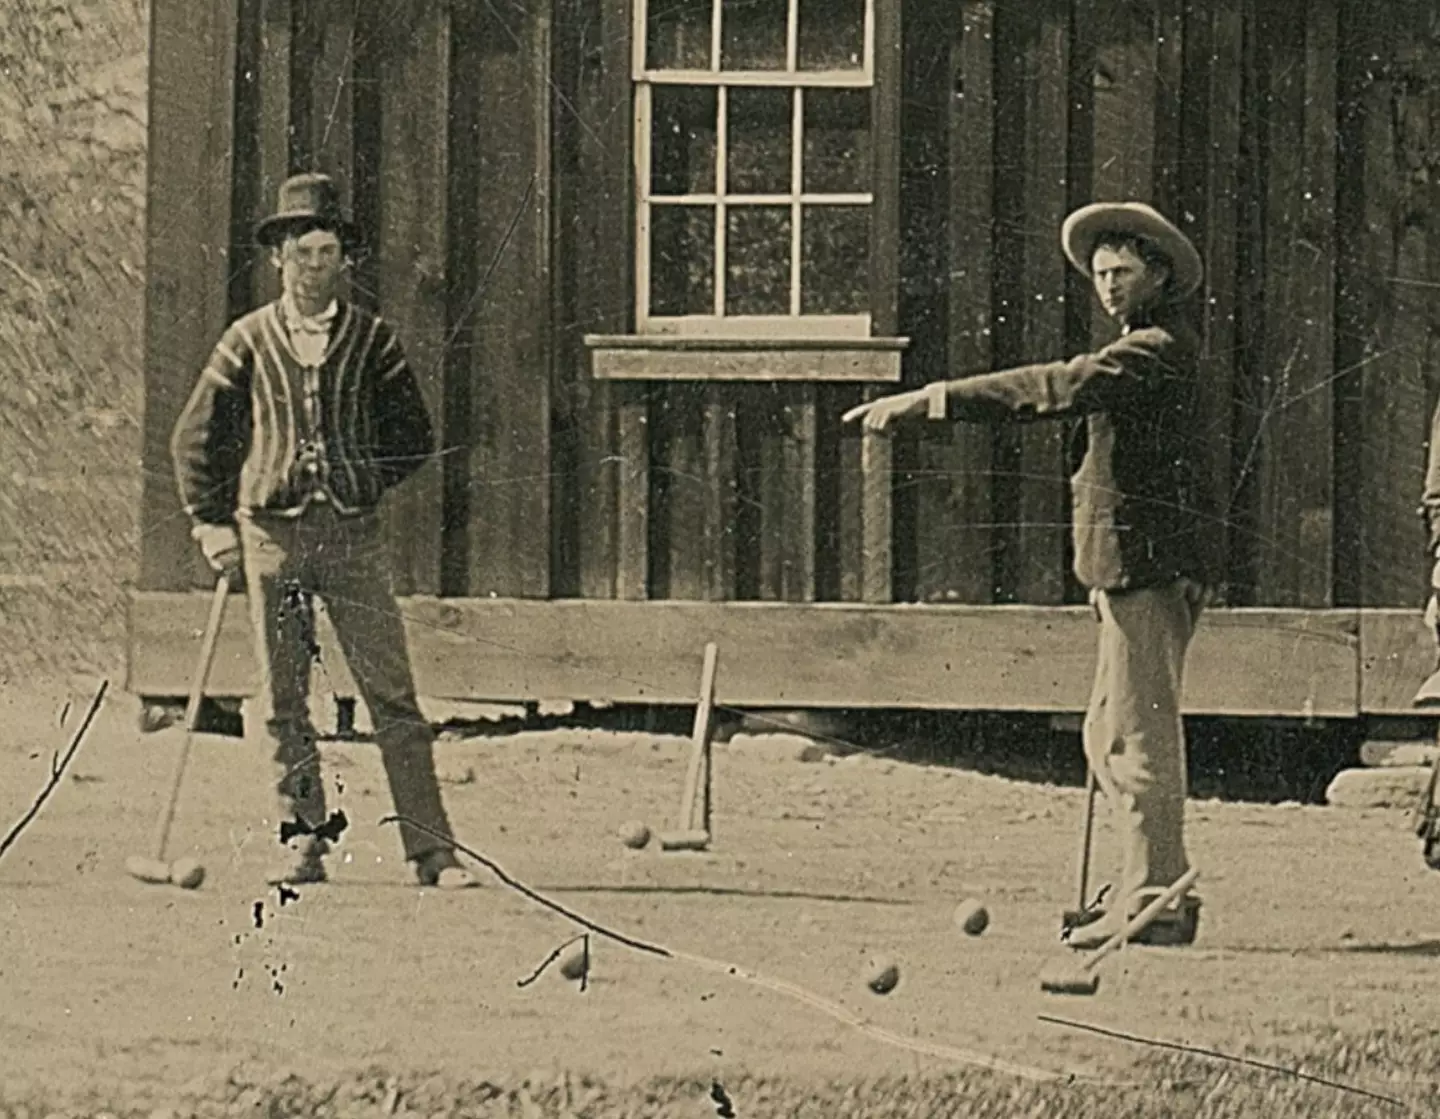 The photo shows Billy the Kid on the left.